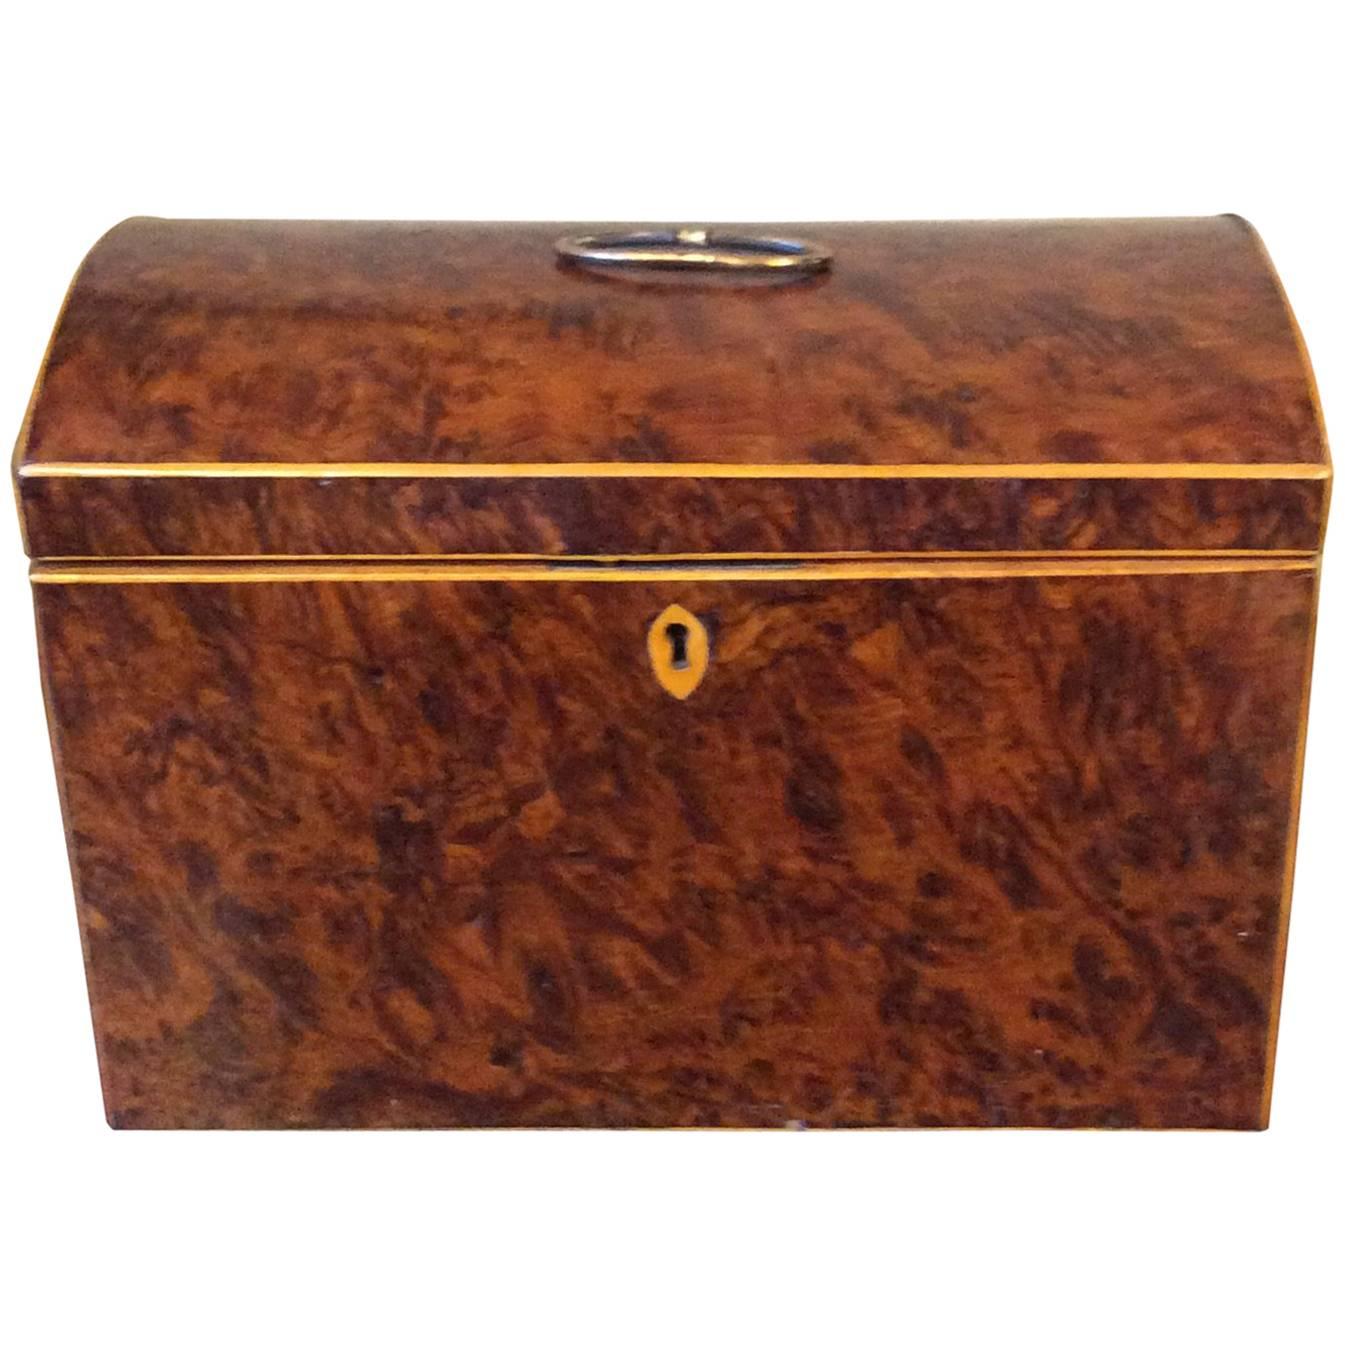 English Burl Yew Wood Tea Caddy with Dome Top For Sale